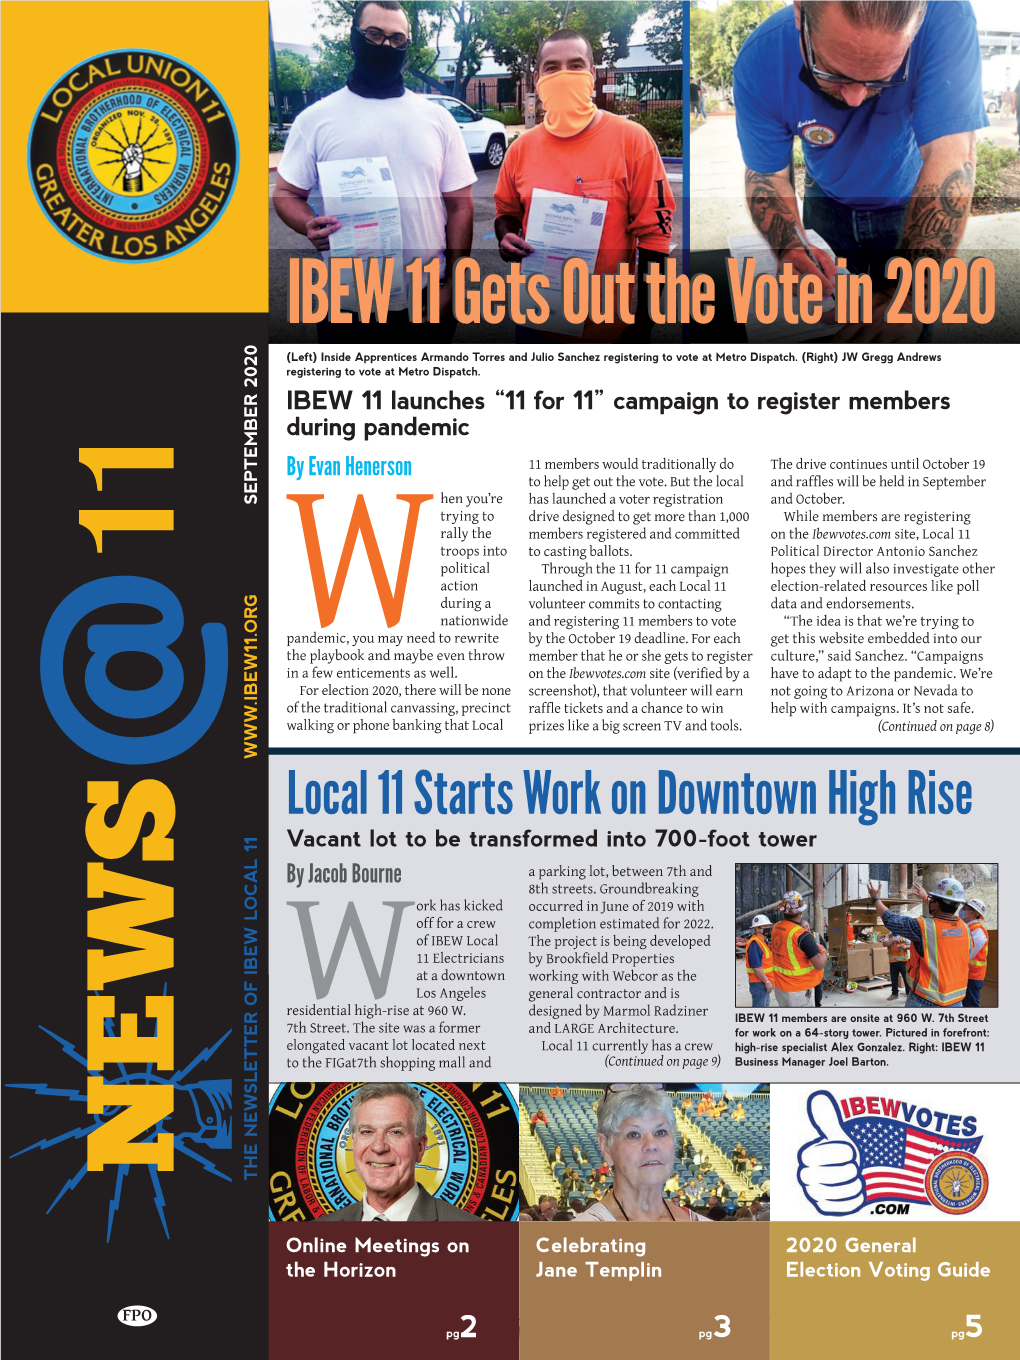 IBEW 11 Gets out the Vote in 2020